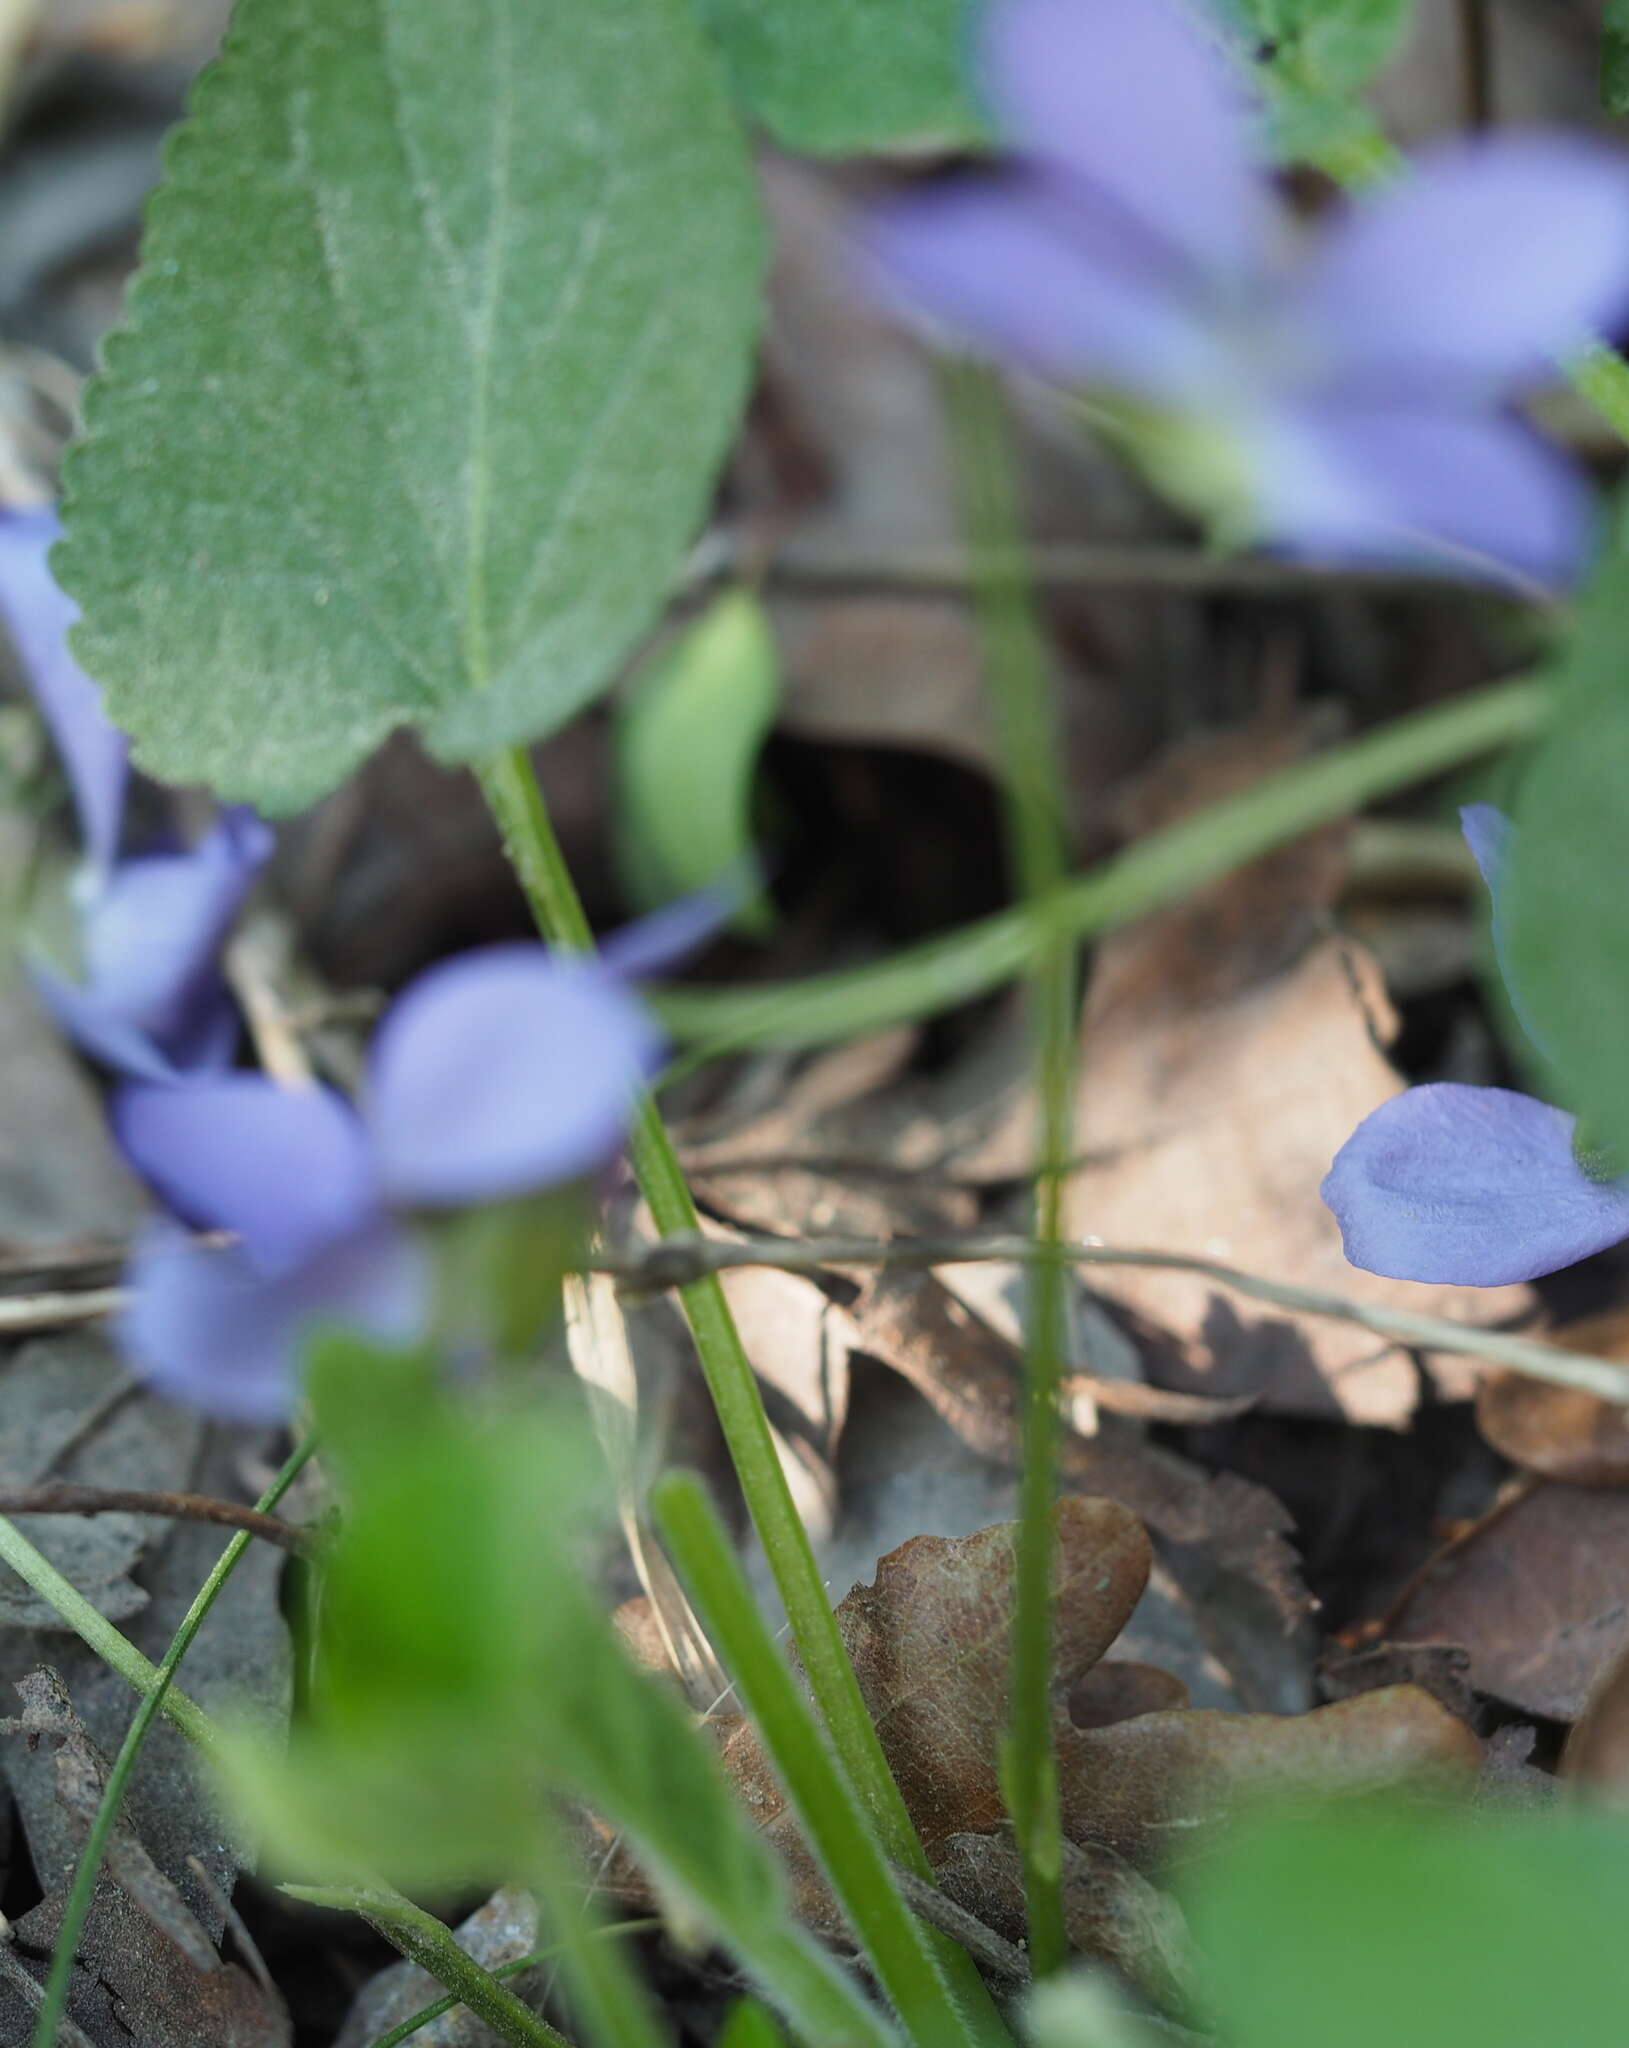 Image of hairy violet